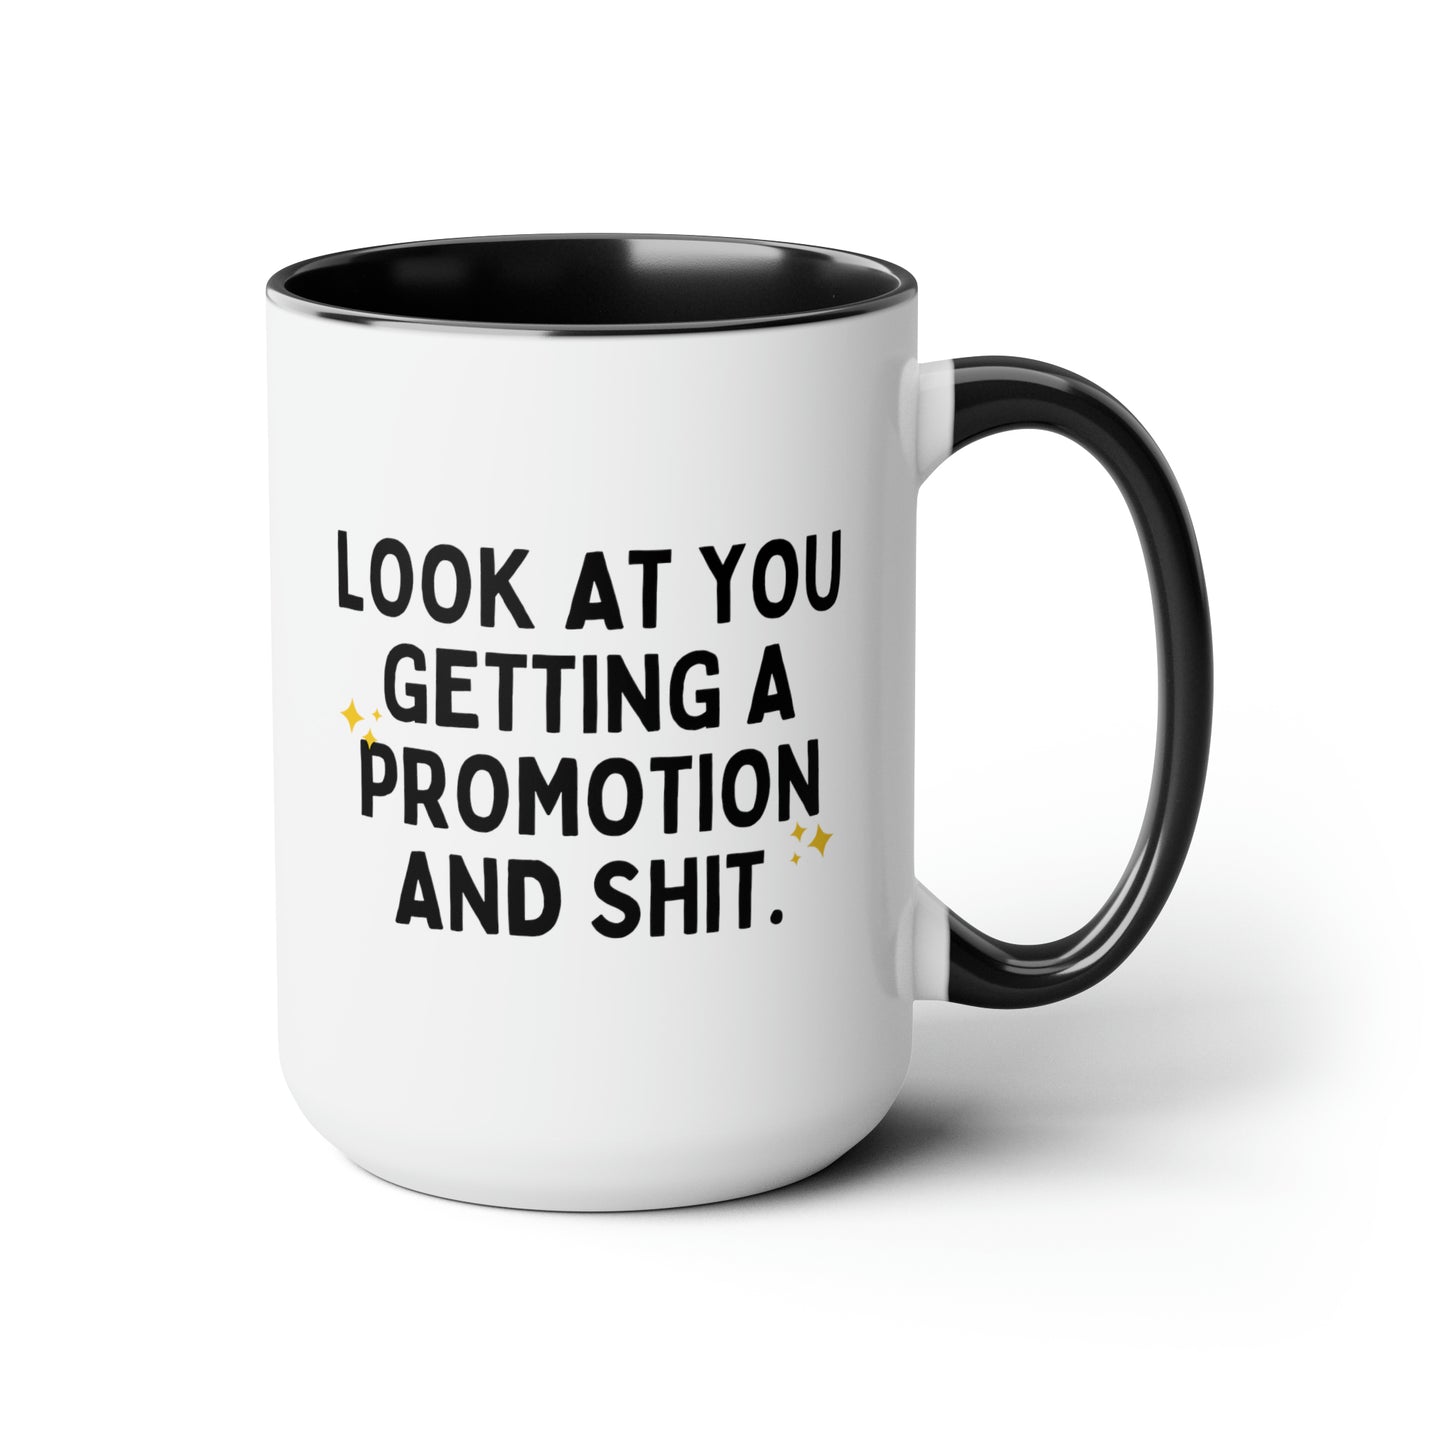 Look At You Getting A Promotion And Shit 15oz white with black accent funny large coffee mug gift for women men promoted coworker colleague congratulations waveywares wavey wares wavywares wavy wares